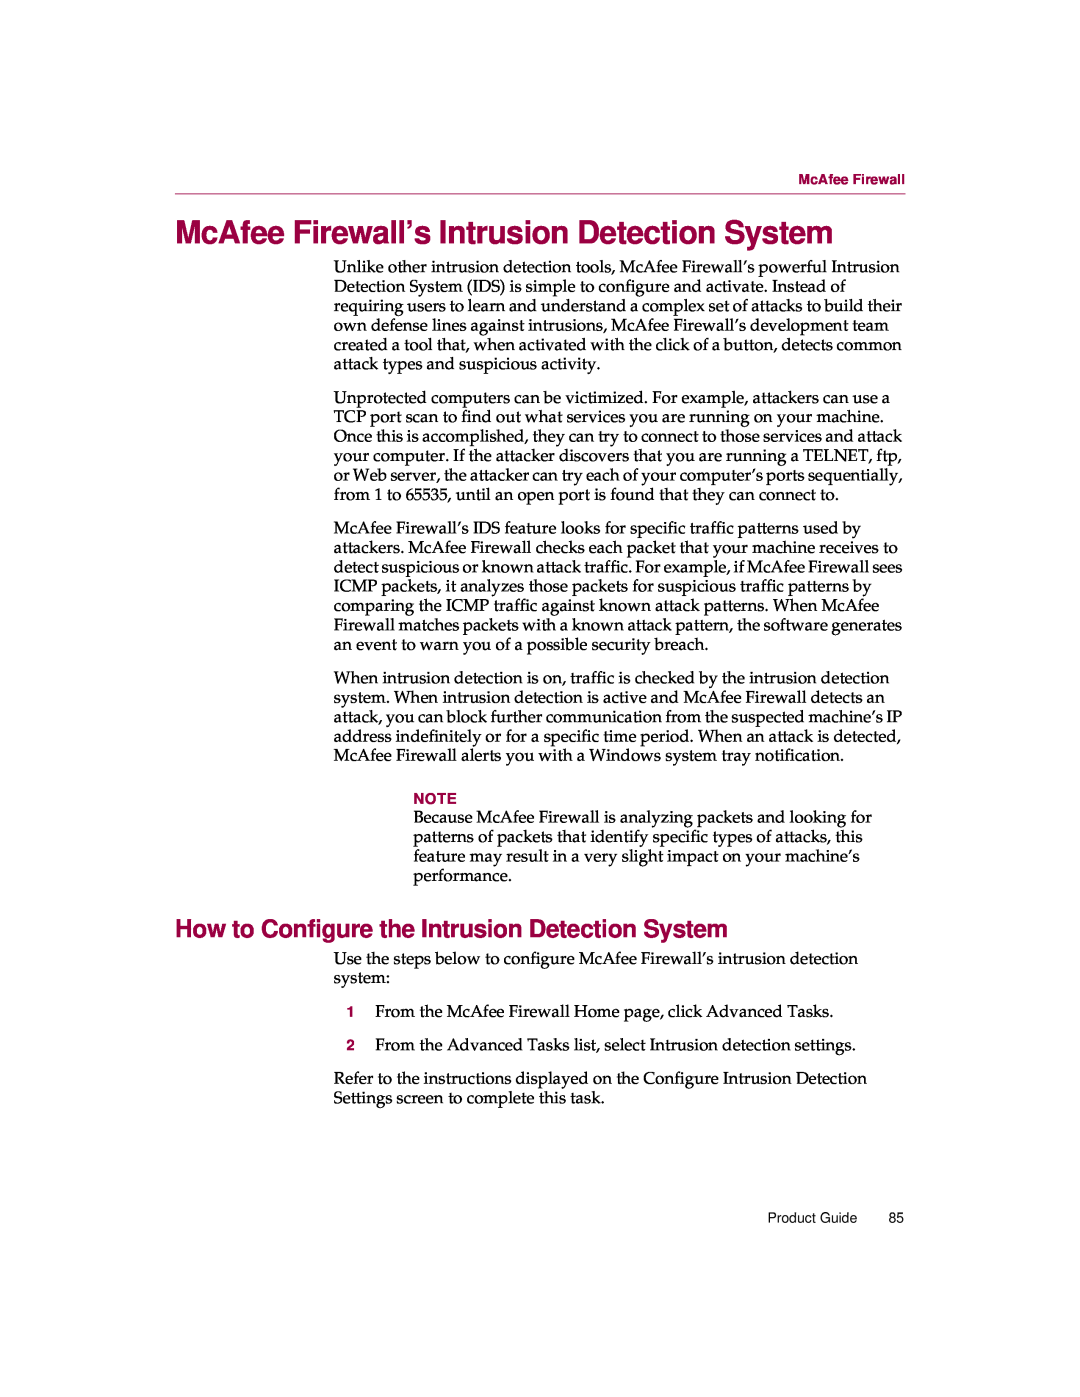 McAfee 5 manual McAfee Firewall’s Intrusion Detection System, How to Configure the Intrusion Detection System 